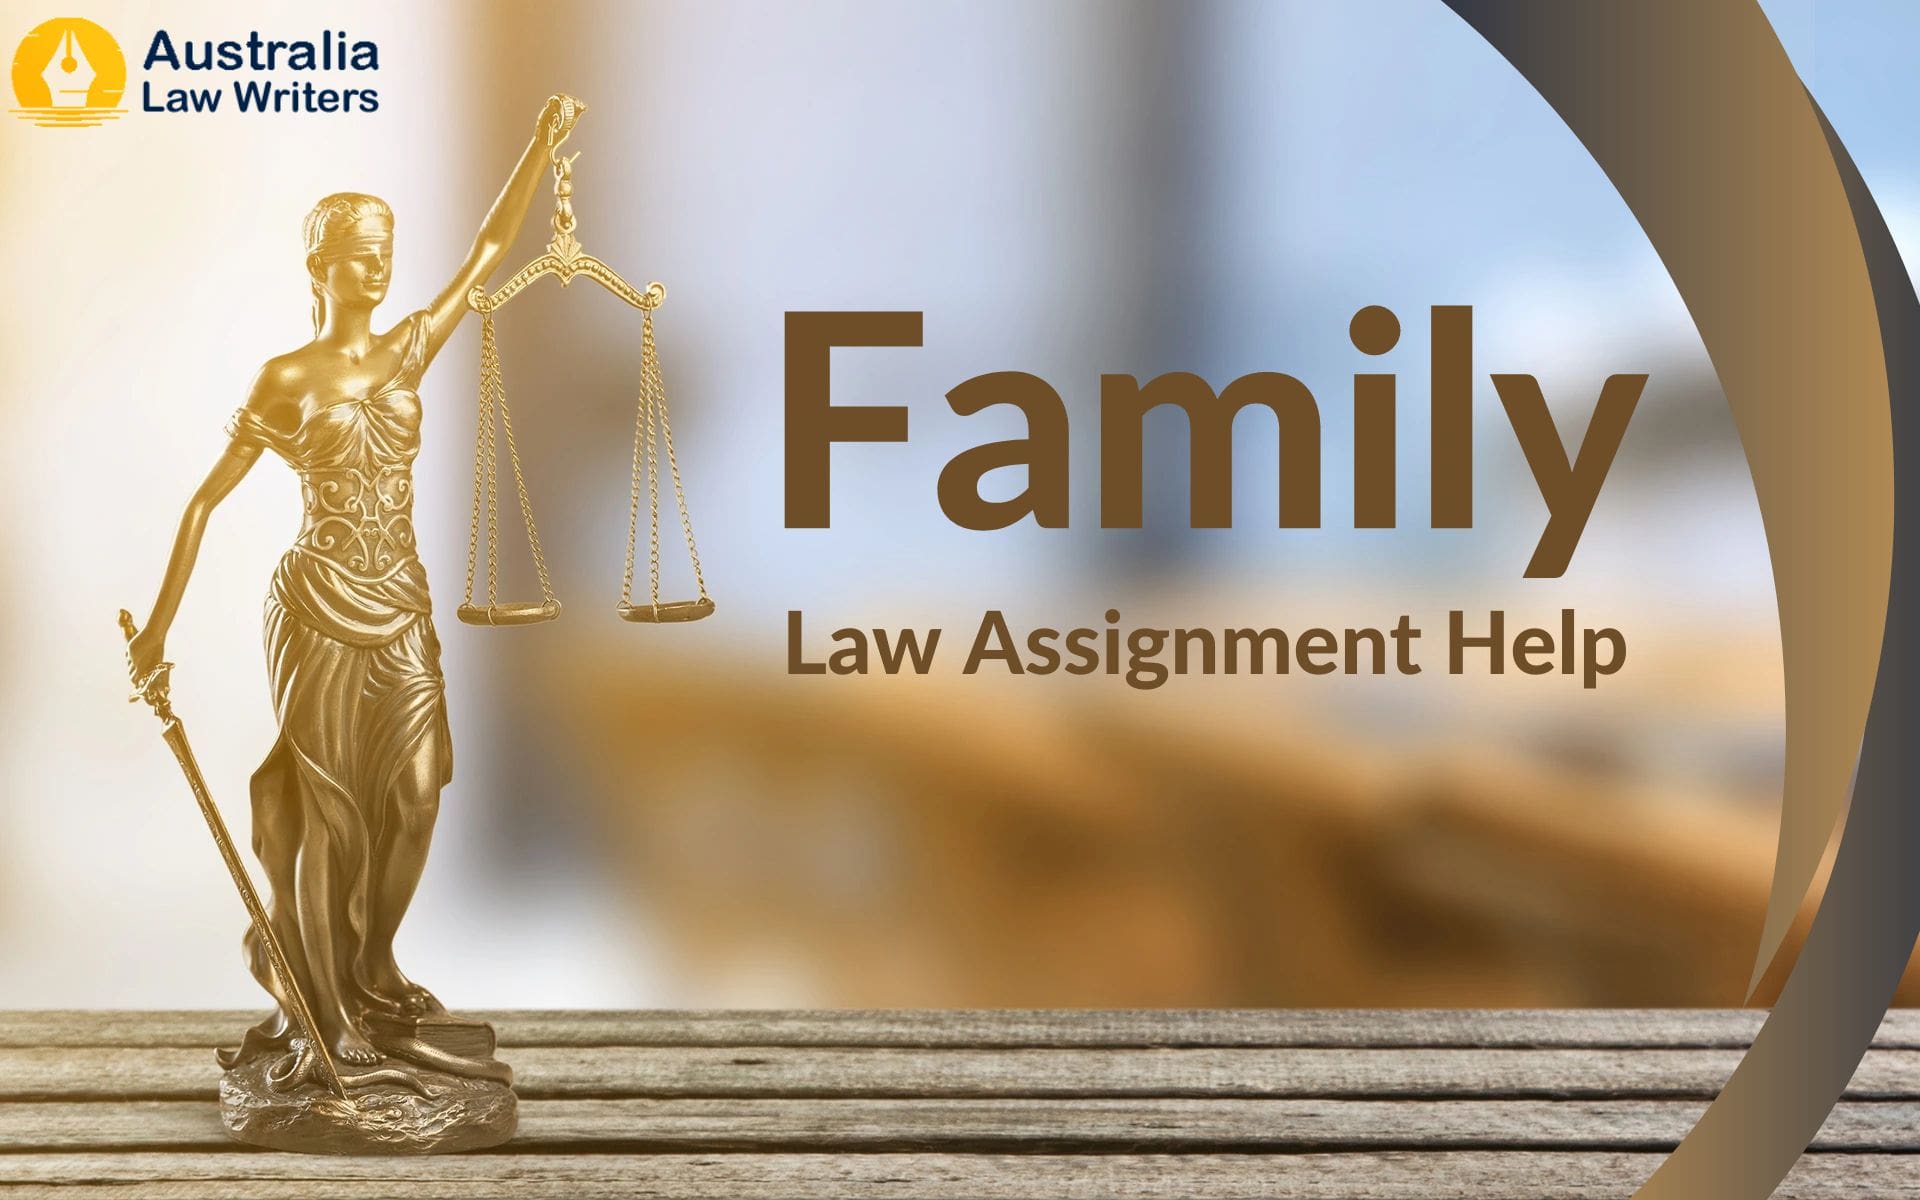 Reliable and trusted assignment services for Family Law